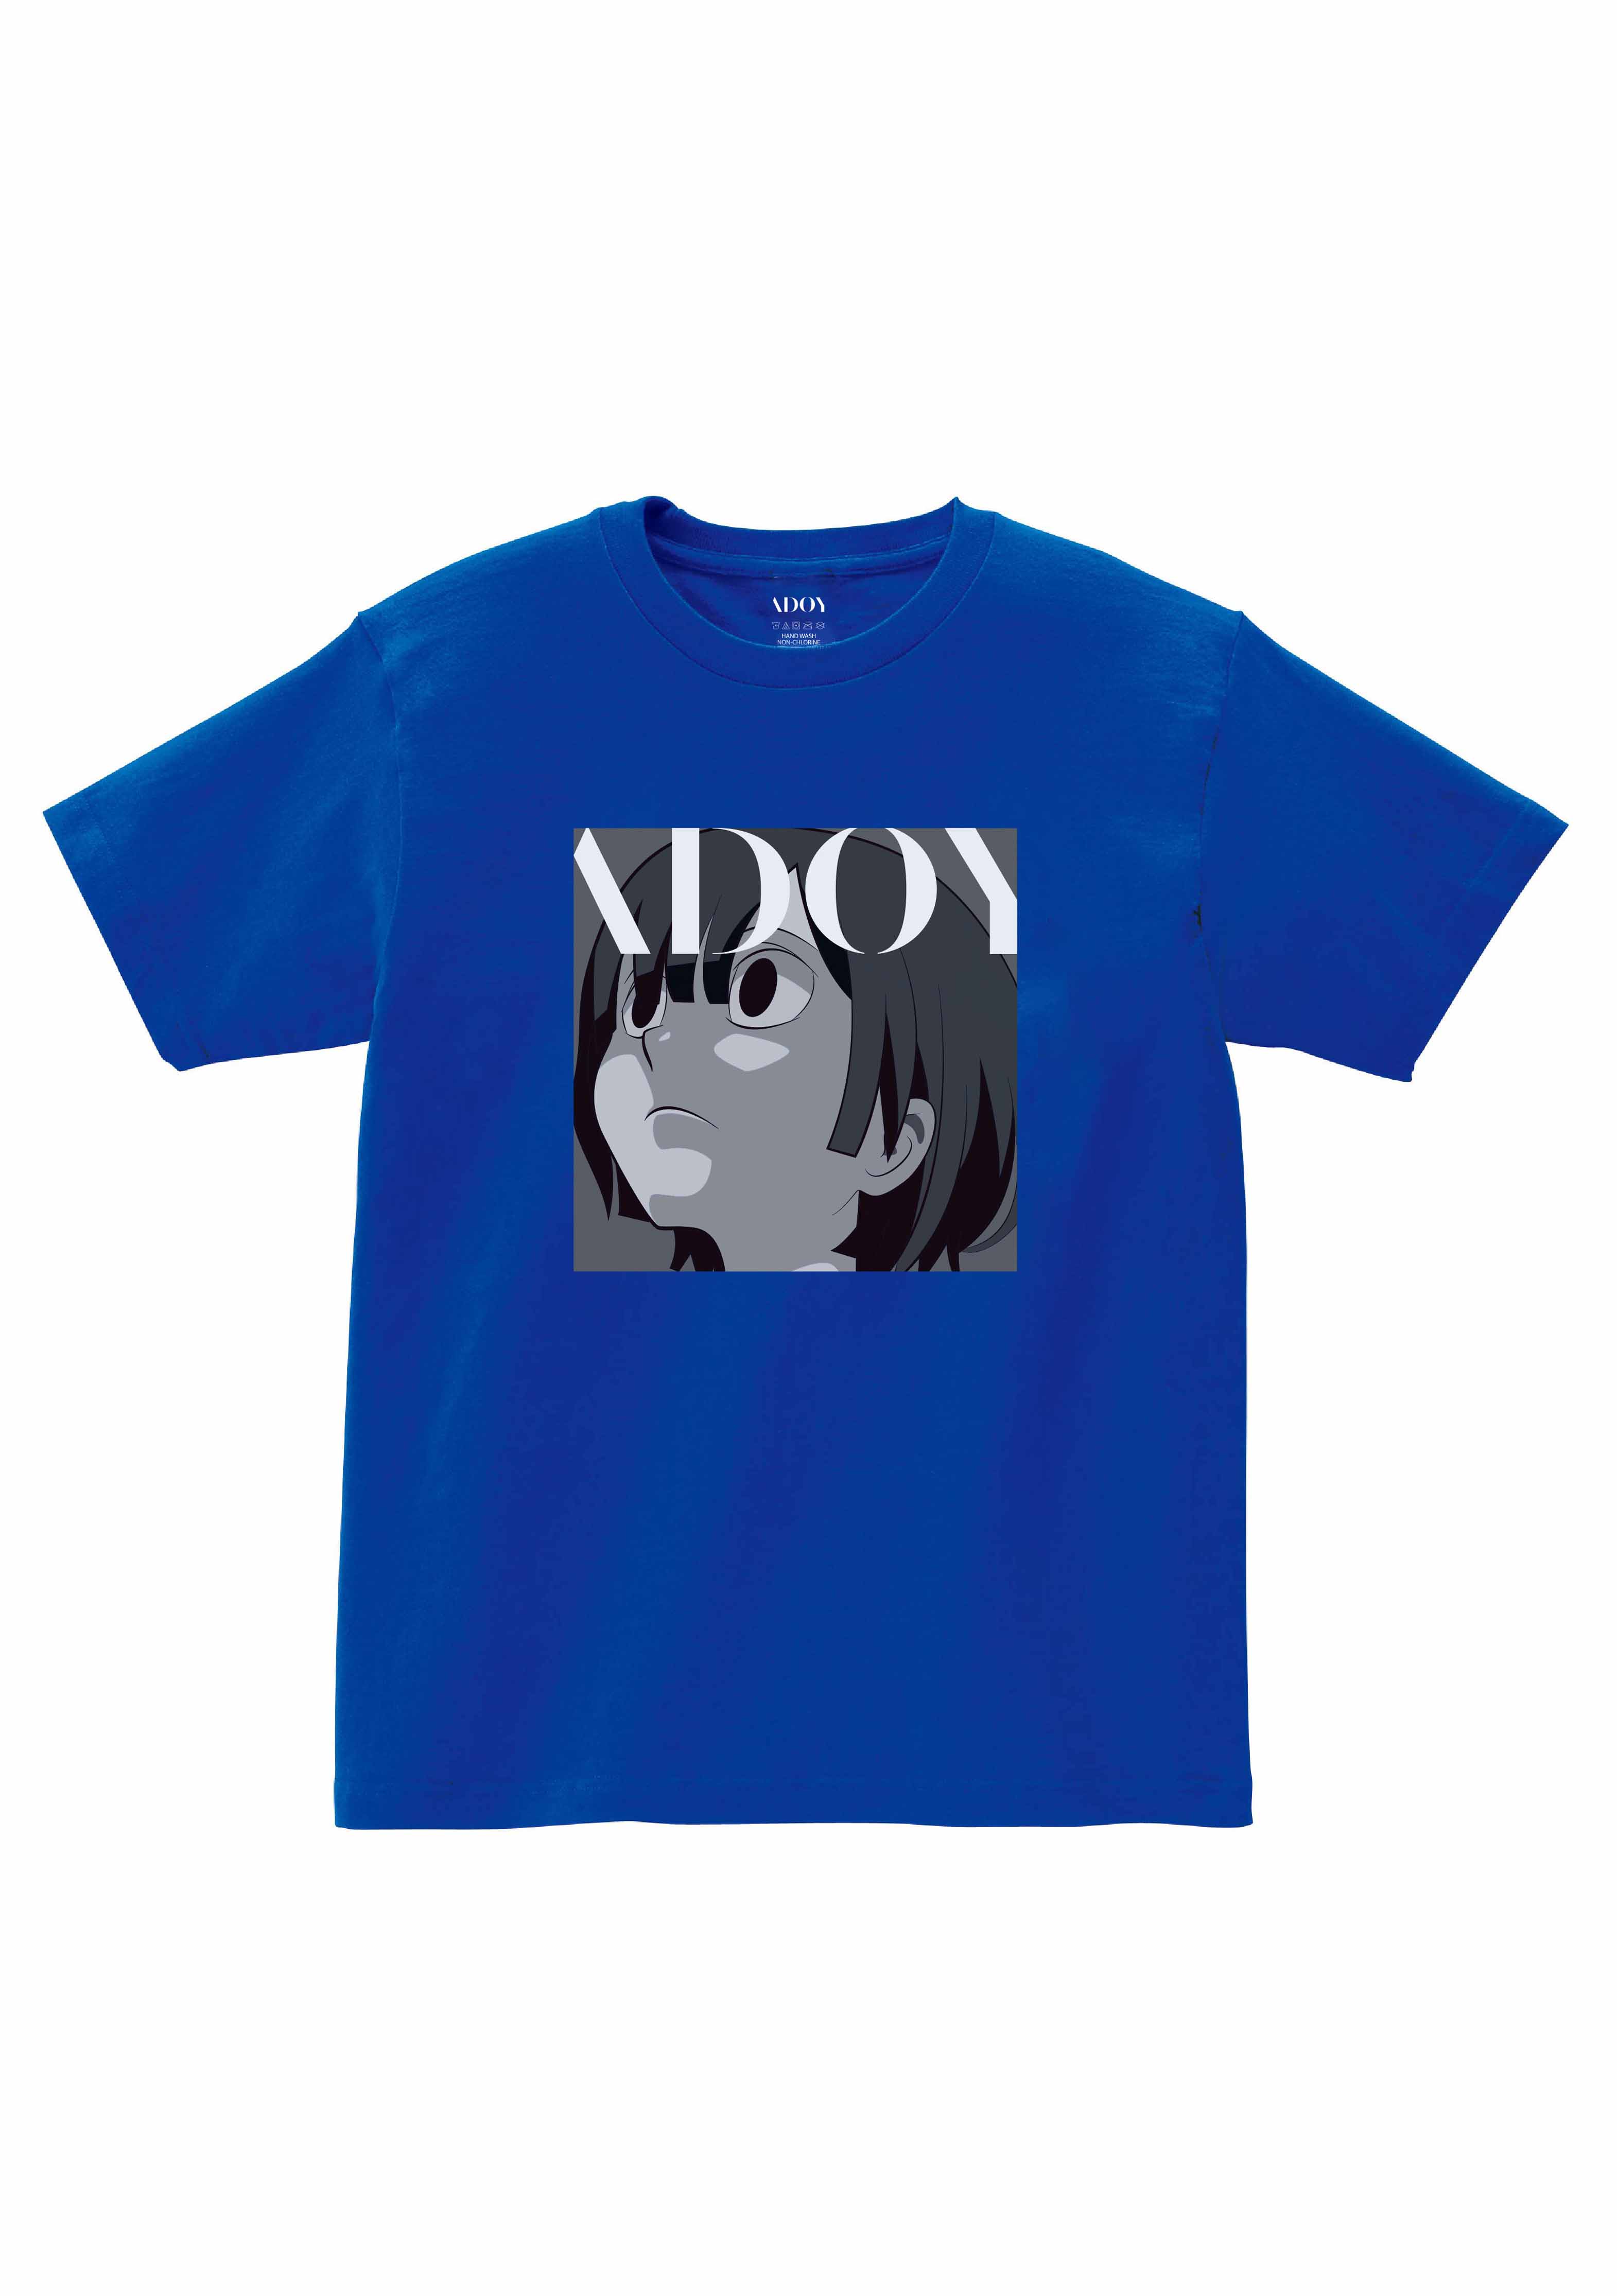 ADOY Collection Line T-Shirt (Pool Blue)